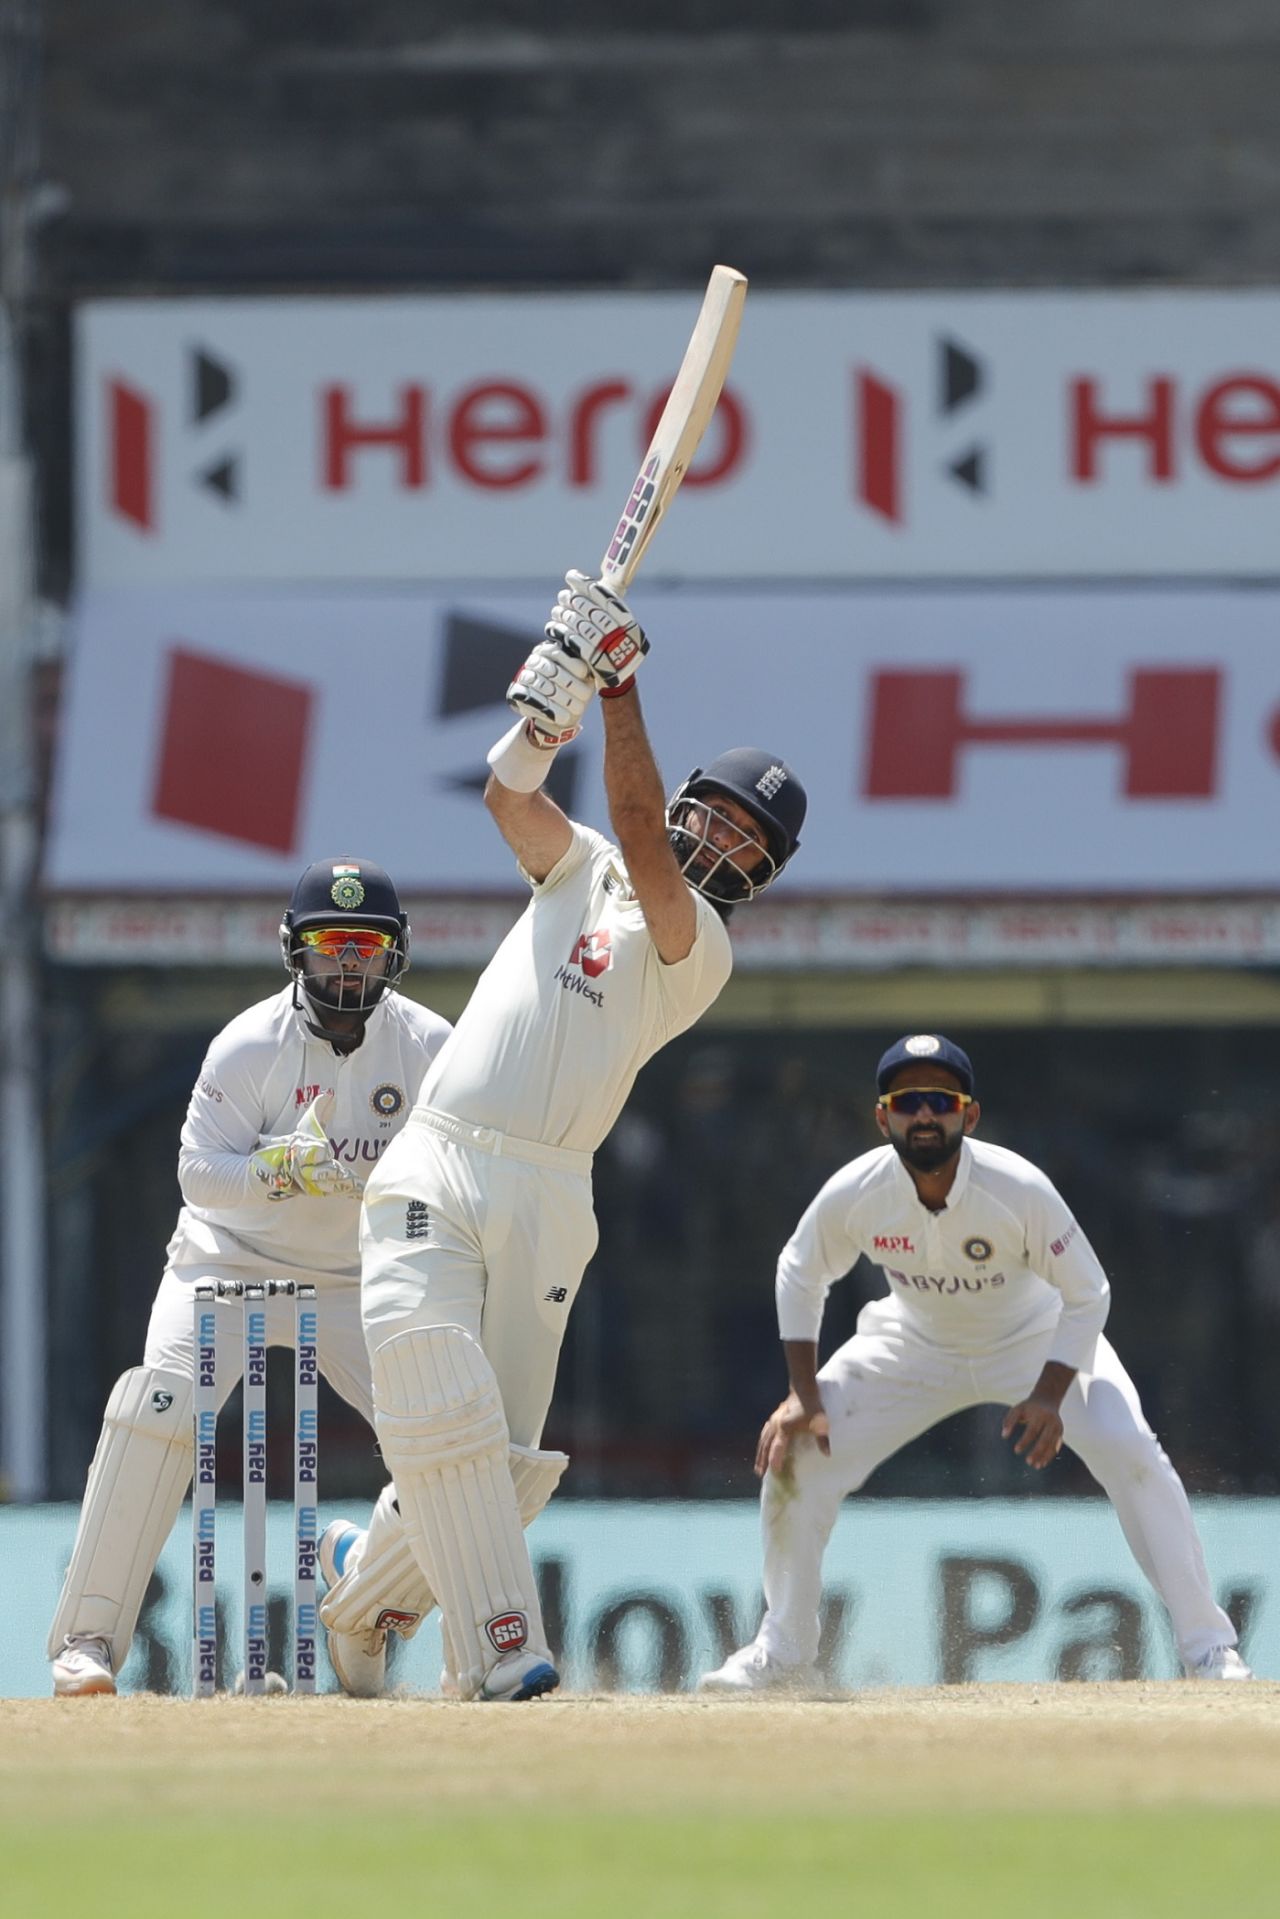 Moeen Ali launches one down the ground, India vs England, 2nd Test, Chennai, 4th day, February 16, 2021